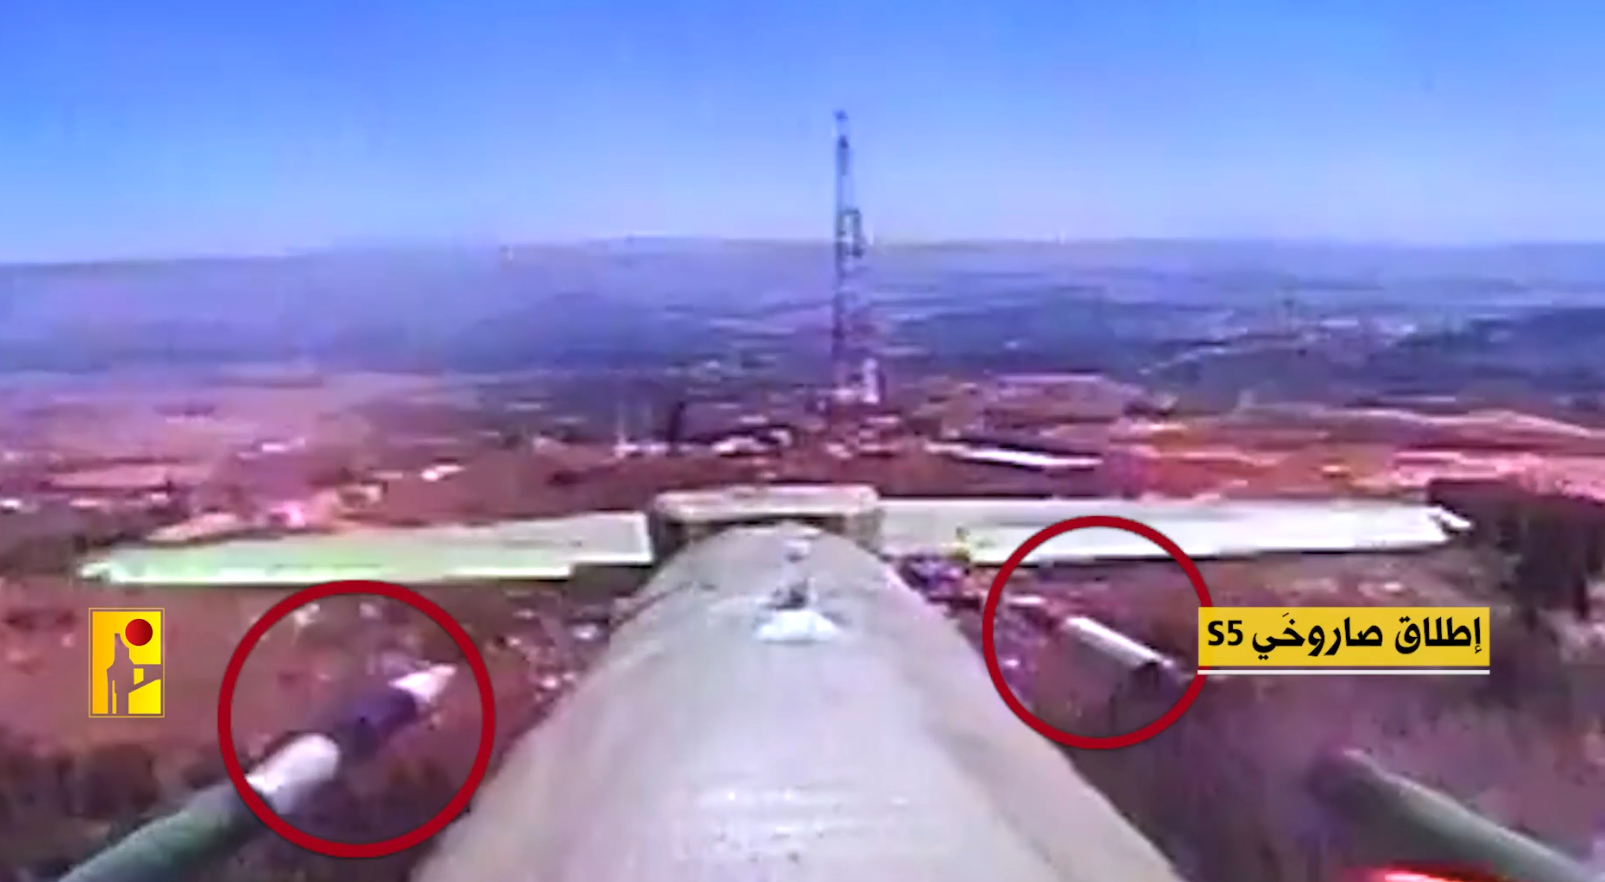 TGA0787 – First Documentation of a Weaponized UAV Armed with S-5 Rockets by Hezbollah